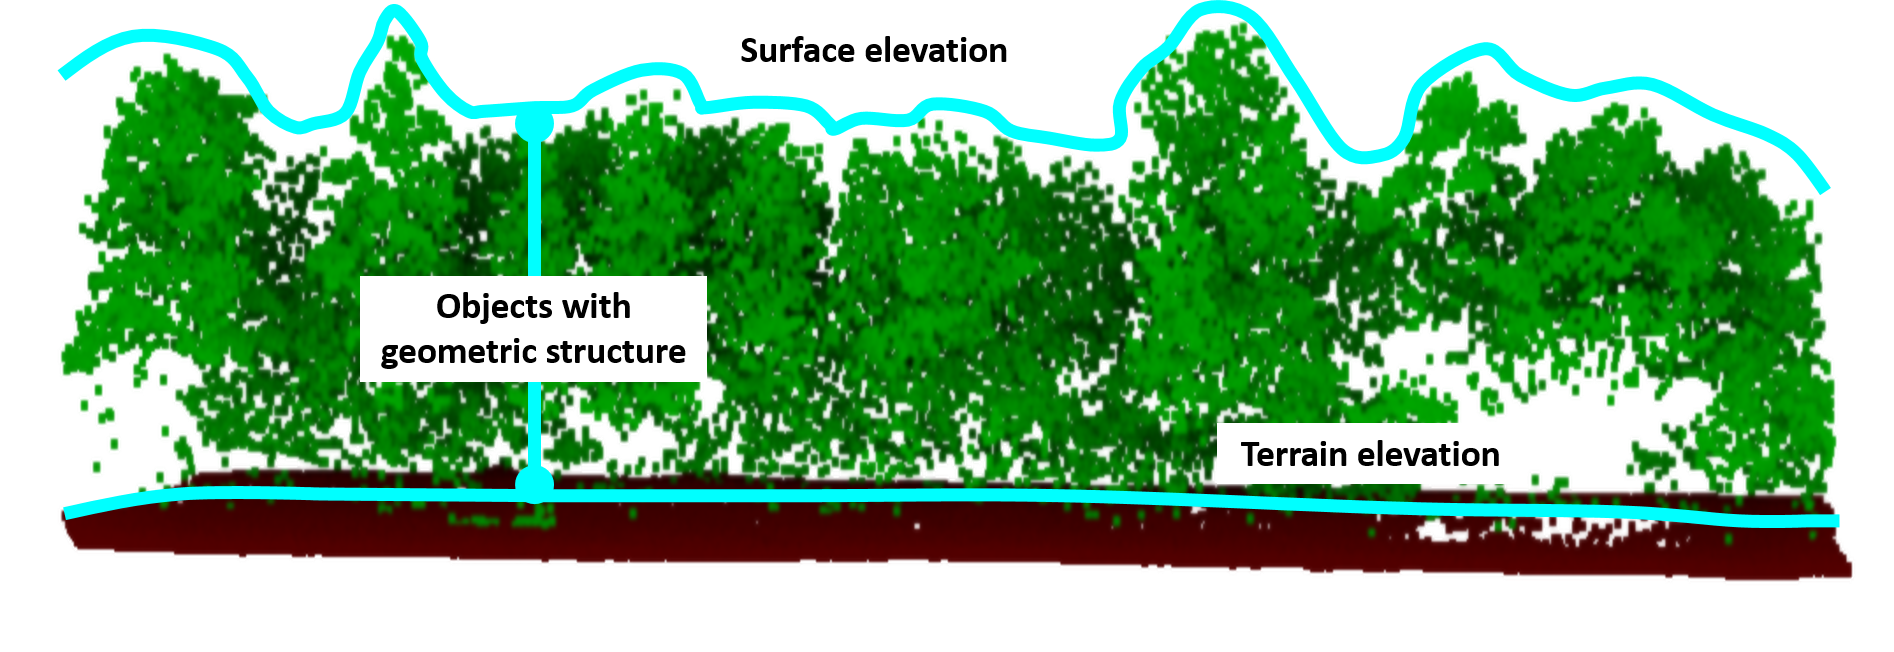 terrain, surface & object structure